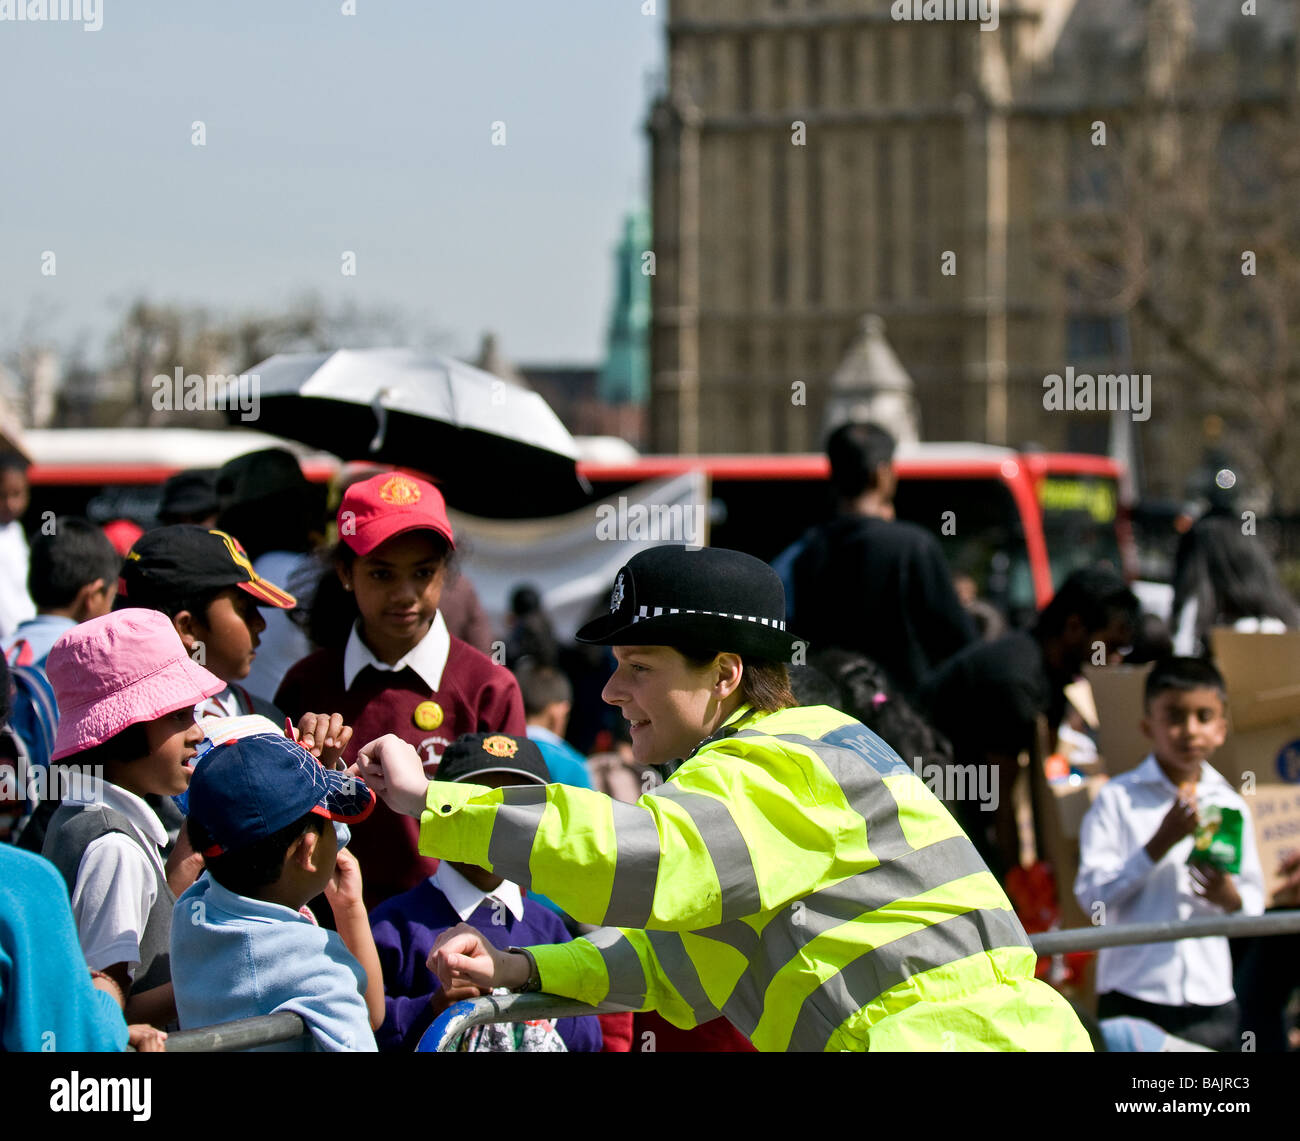 A friendly female Metropolitan Policewoman talking to Tamil school children at a protest in Westminster in London. Stock Photo